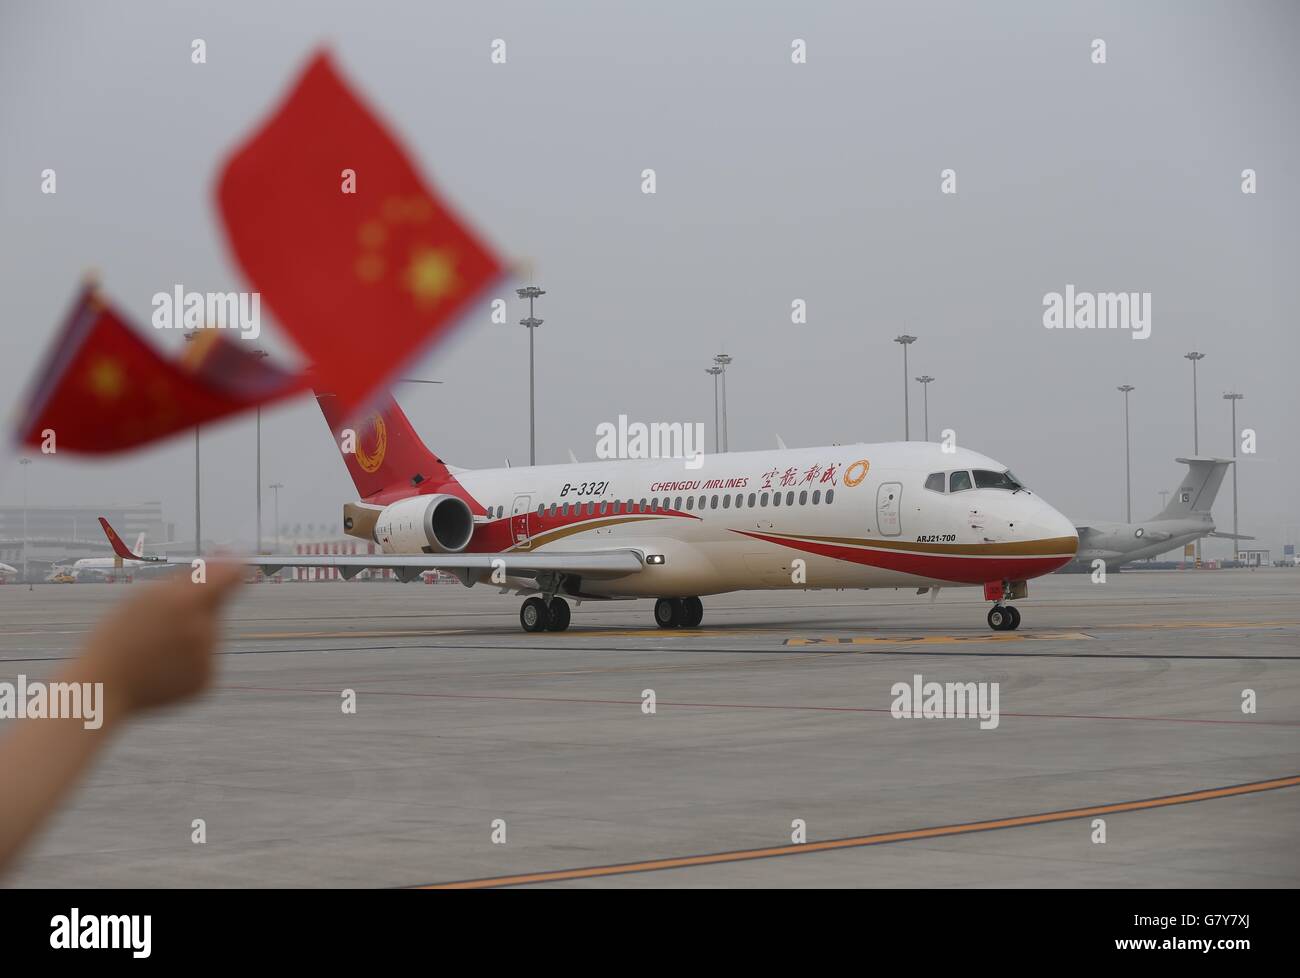 Chengdu, China's Sichuan Province. 28th June, 2016. Chengdu Airlines ARJ21-700 prepares for takeoff at Shuangliu International Airport in Chengdu, capital of southwest China's Sichuan Province, June 28, 2016. ARJ21, manufactured by the Commercial Aircraft Corp. of China (COMAC), made its maiden commercial flight from Chengdu to Shanghai Tuesday. The domestically-designed airliner is China's first regional jet manufactured according to international standards. © Ding Ting/Xinhua/Alamy Live News Stock Photo